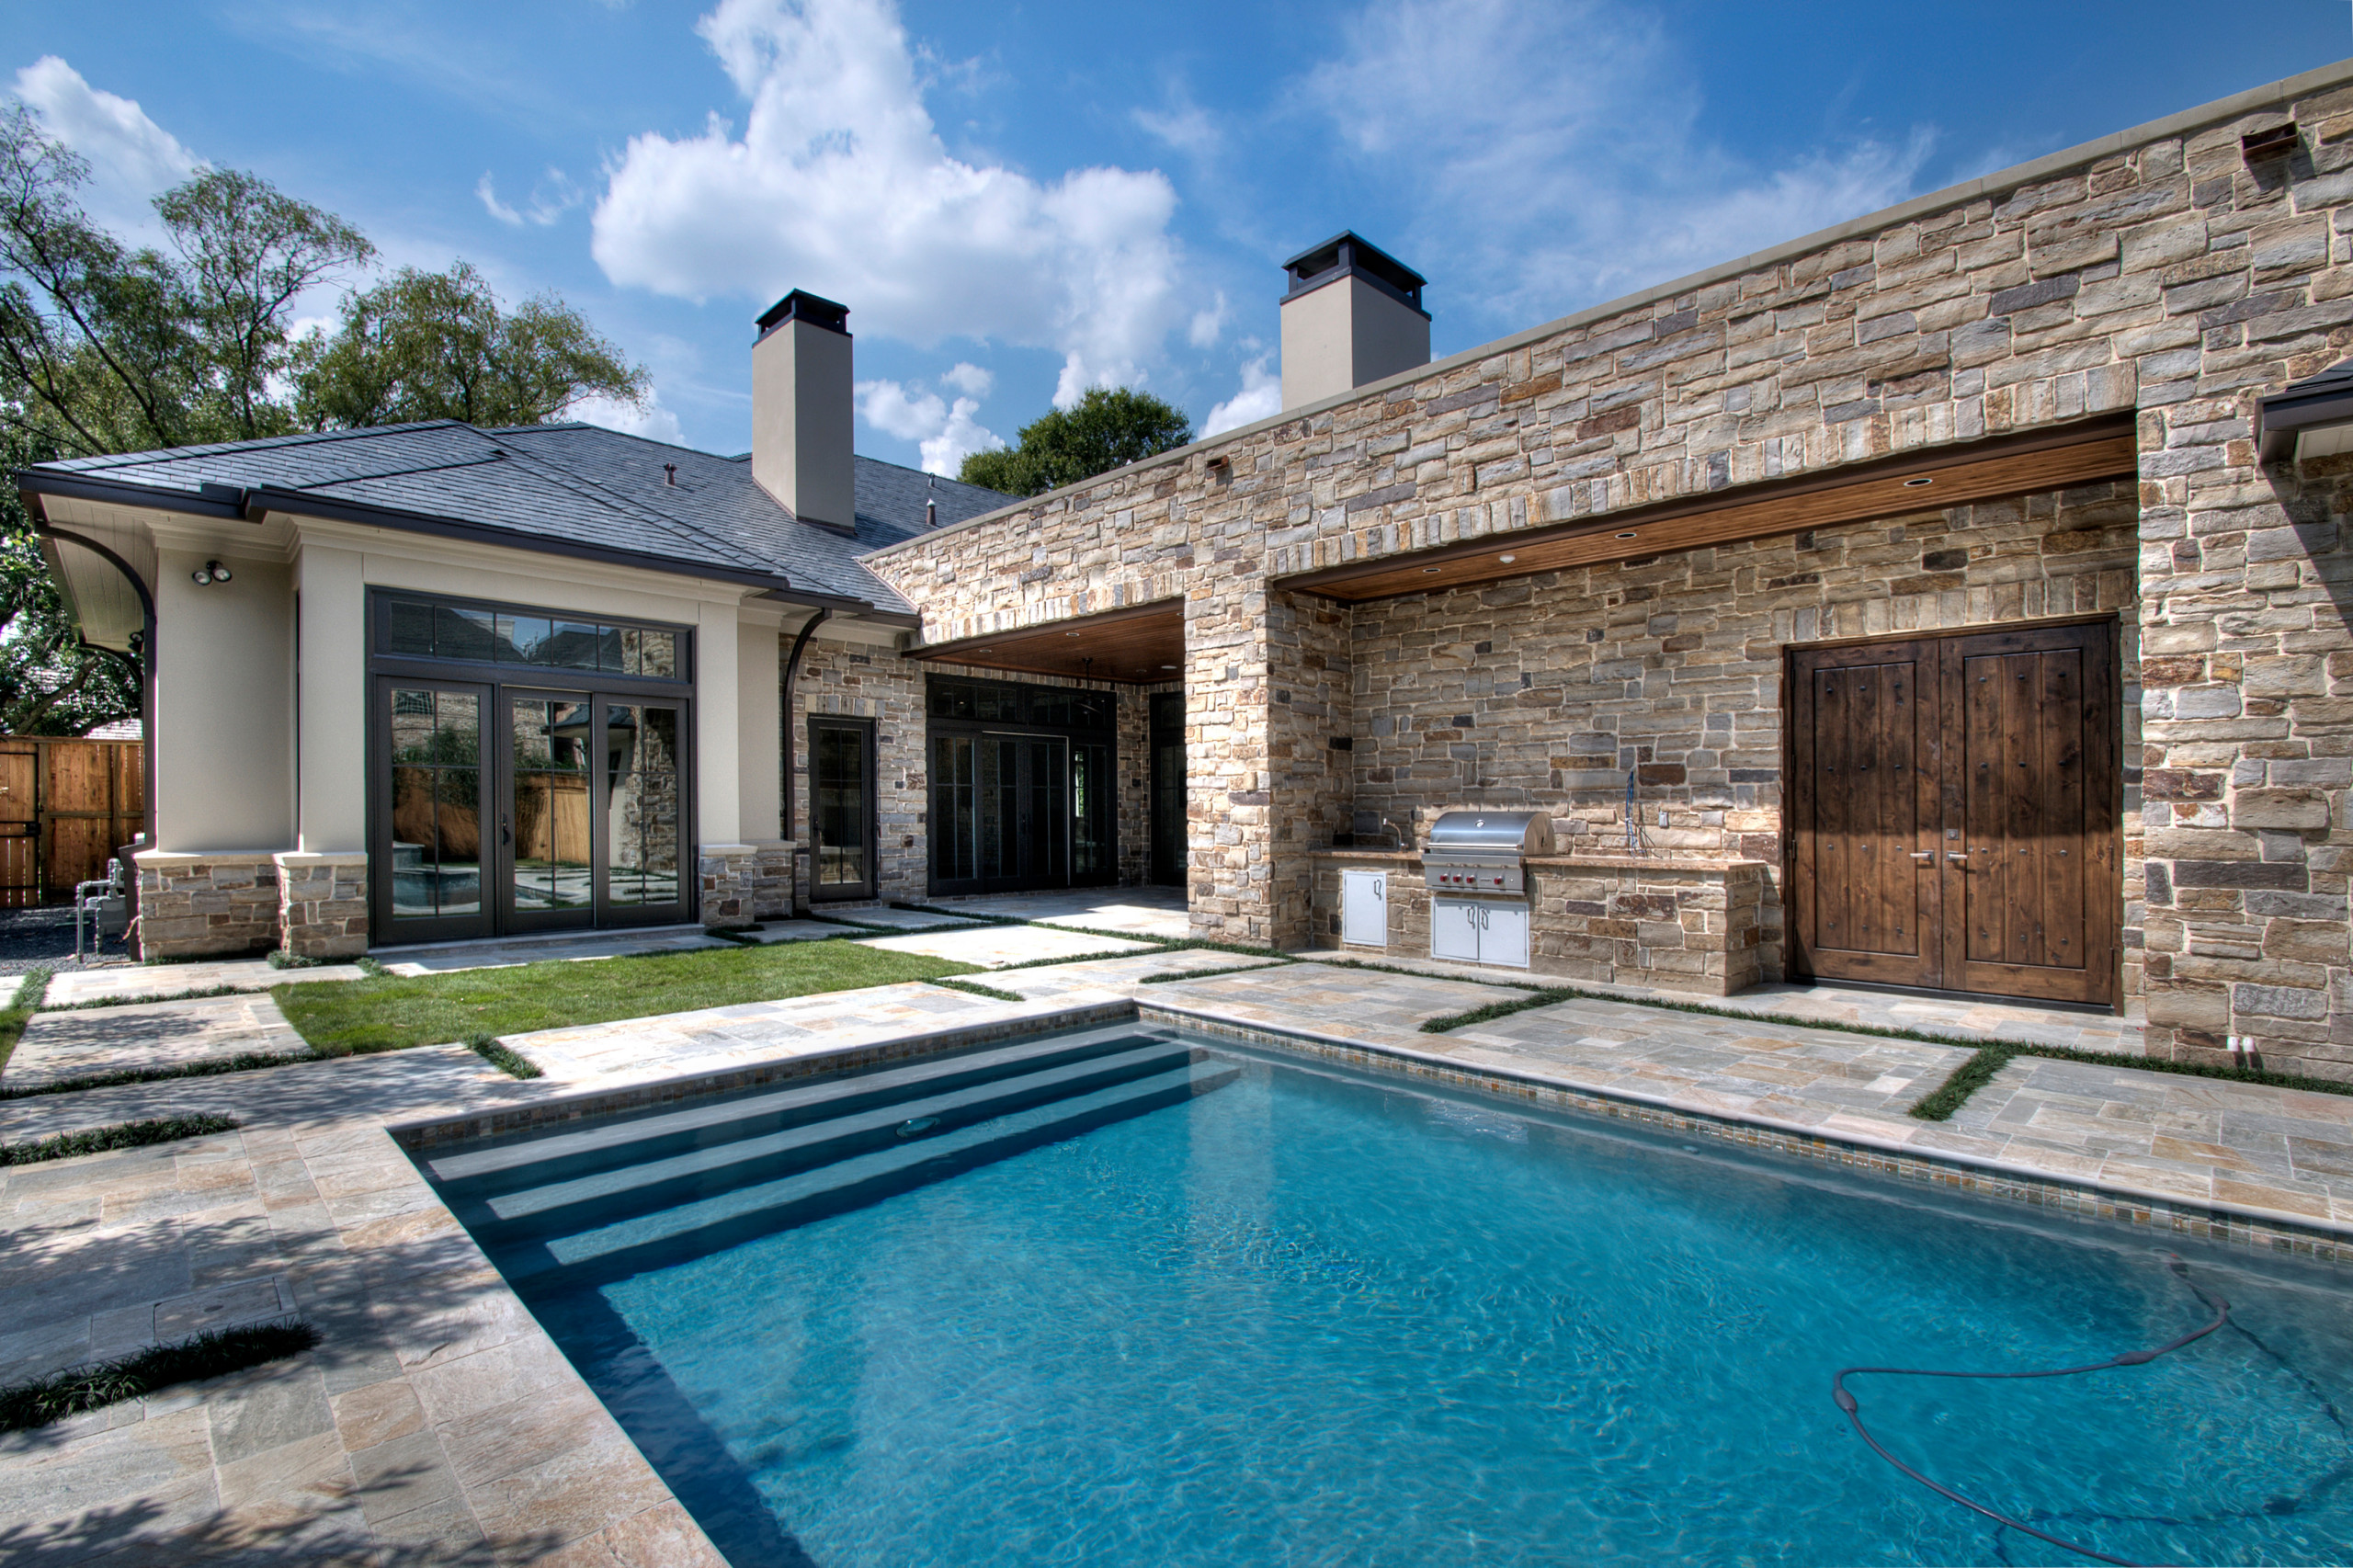 Tanglewood Custom by Rudolph Colby Architect